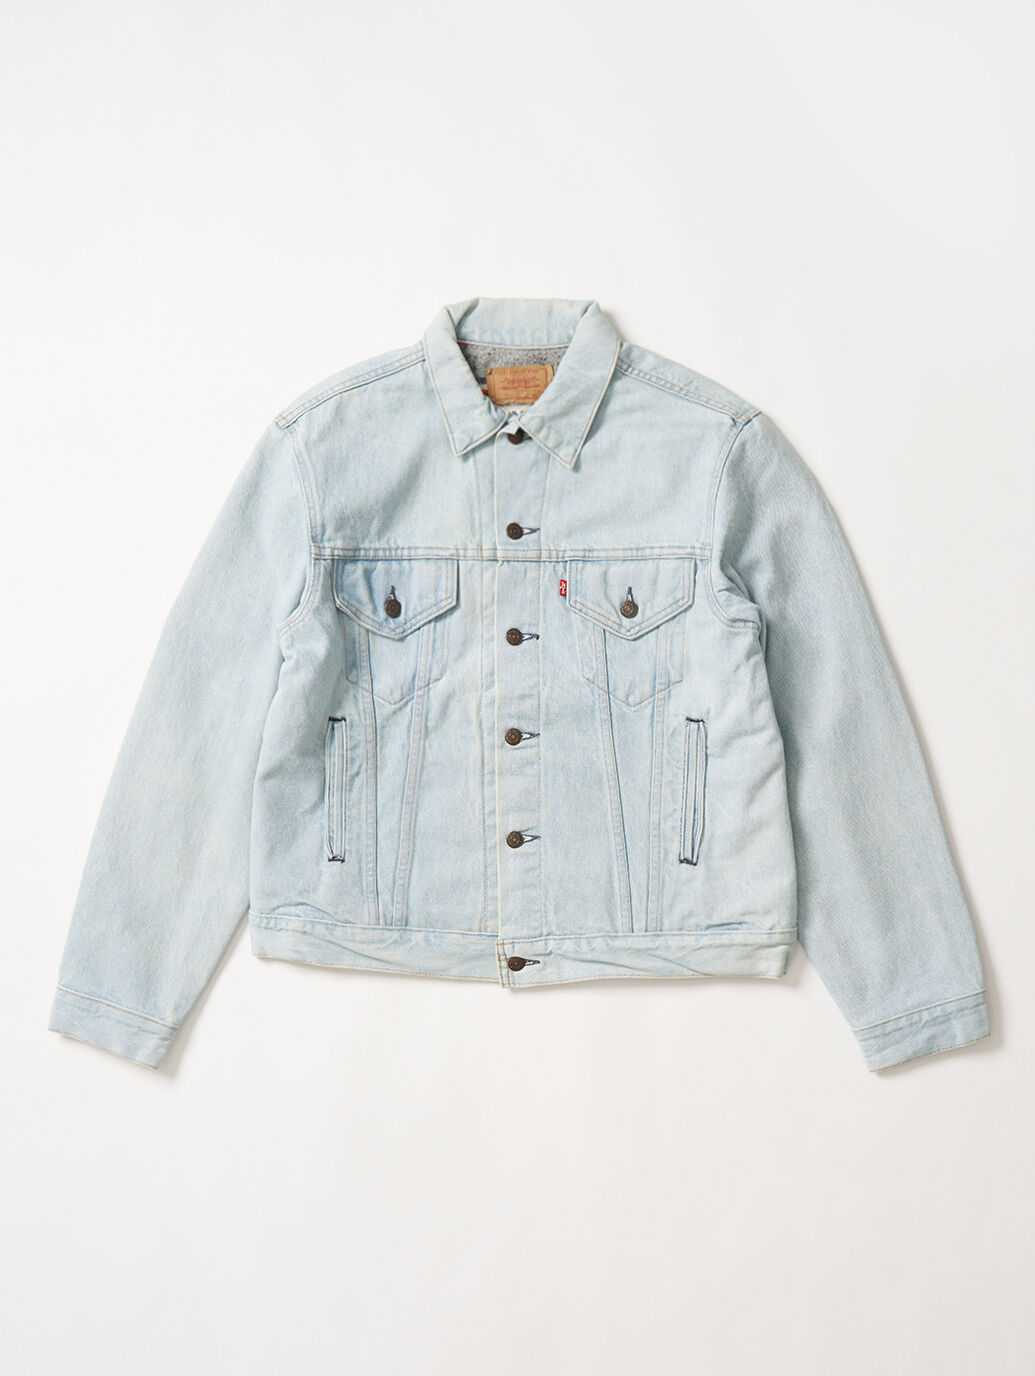 LEVI'S® AUTHORIZED VINTAGE MADE IN THE USA フランネルトラッカー 